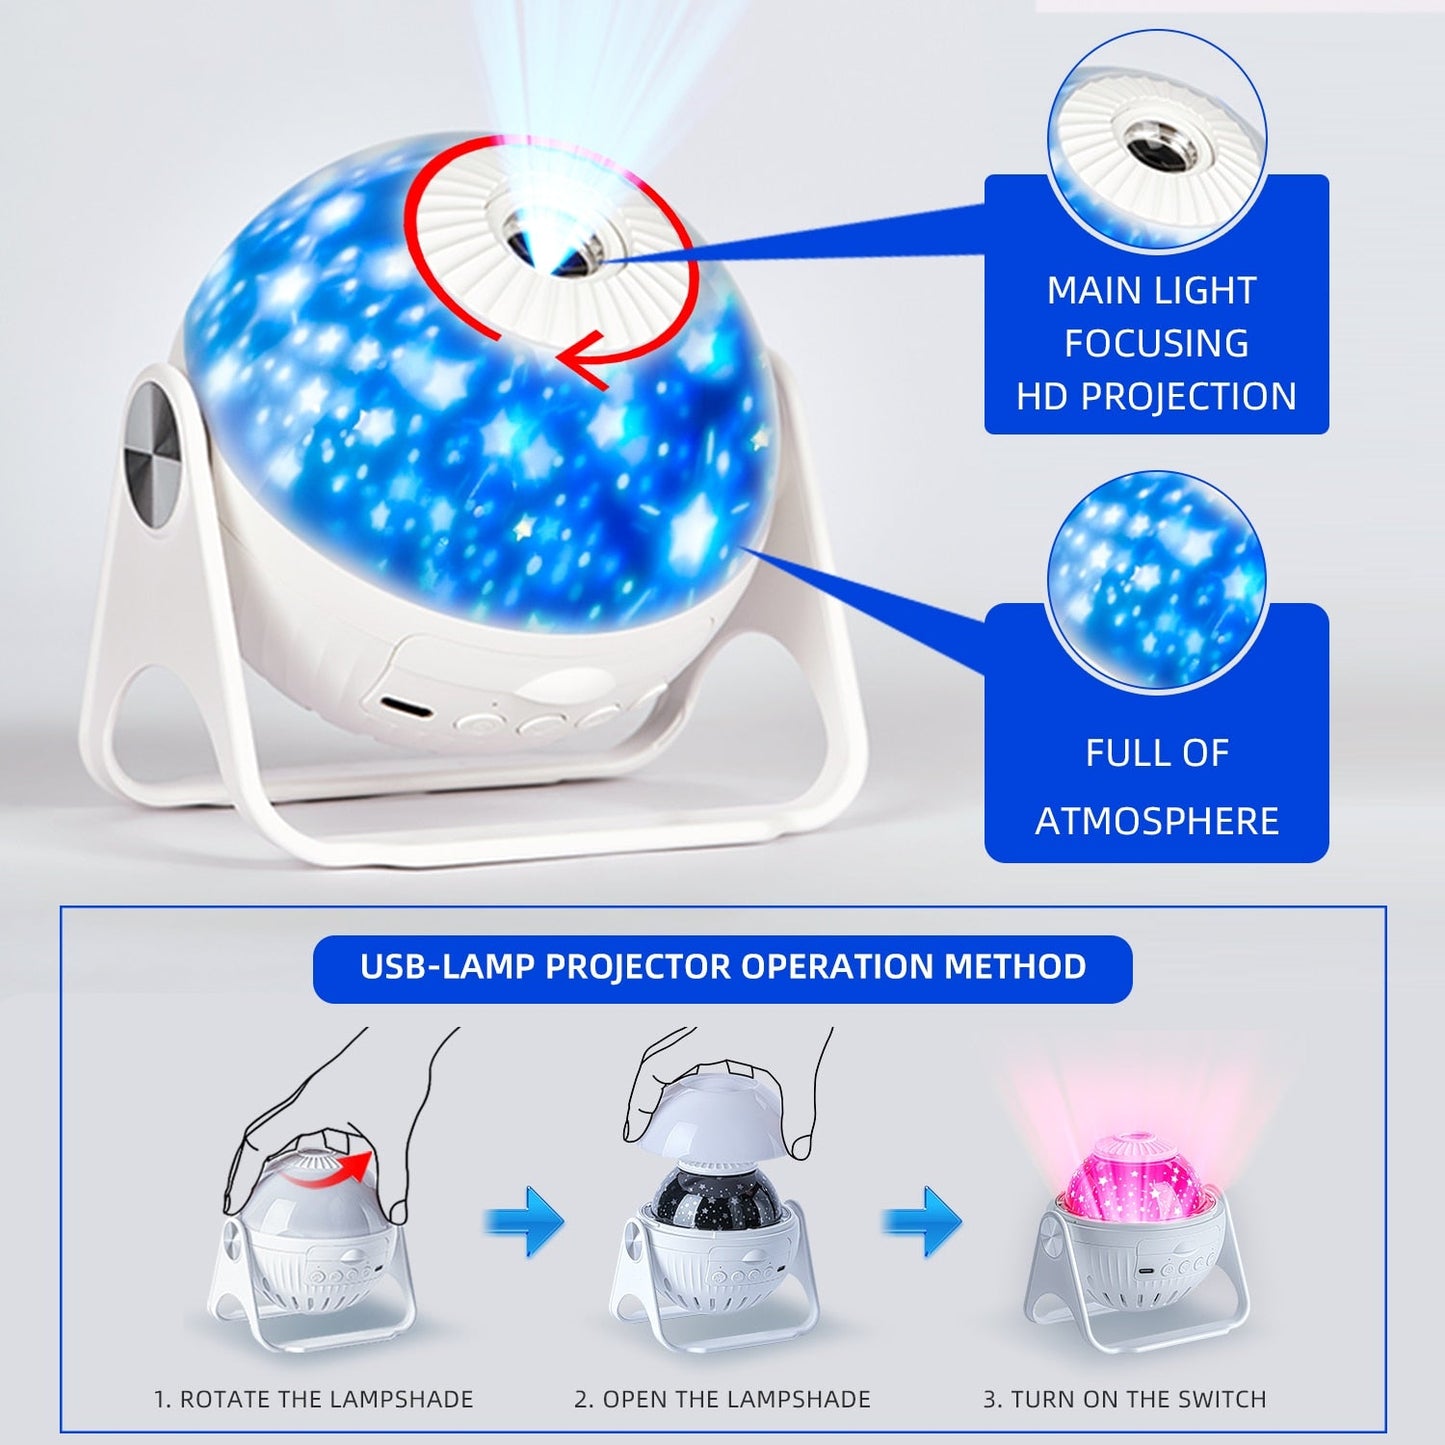 Projector Galaxy Light Projector Support 360° Rotation,6 in 1 Star Projector Night Light with Nebula Moon Planets Aurora,Suitable for Baby Kids Bedroom Ceiling/Game Room/Party/Bar